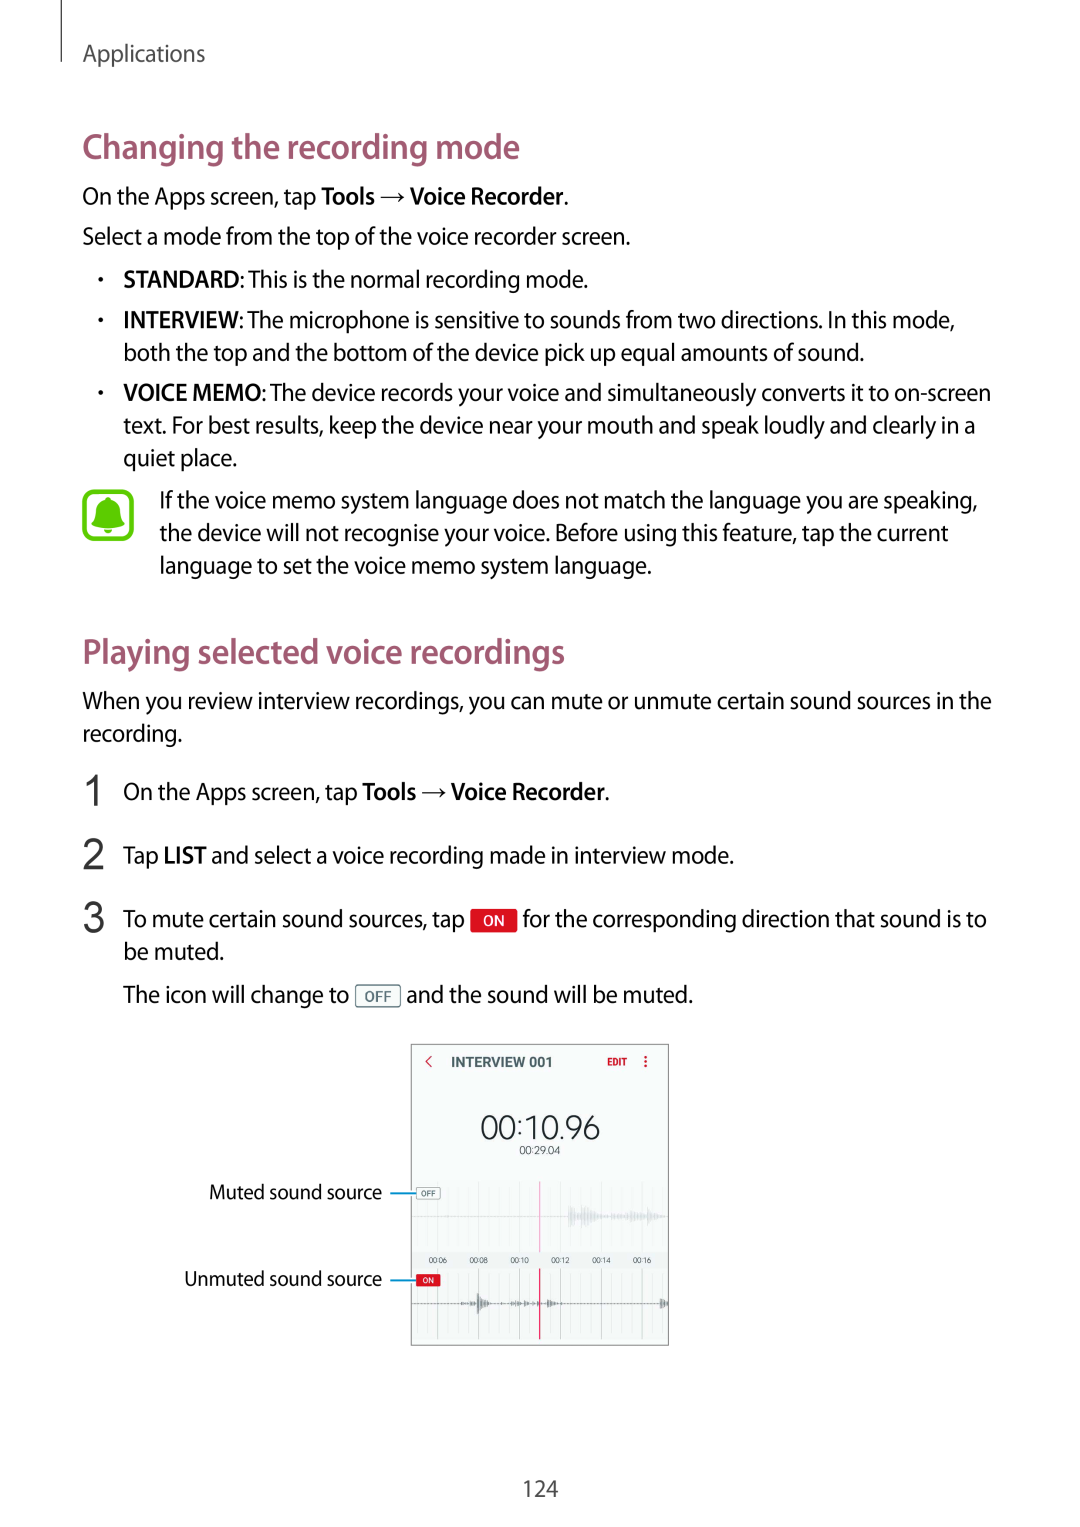 Samsung SM-G928FZDAATO, SM-G925FZKADBT manual Changing the recording mode, Playing selected voice recordings, Applications 